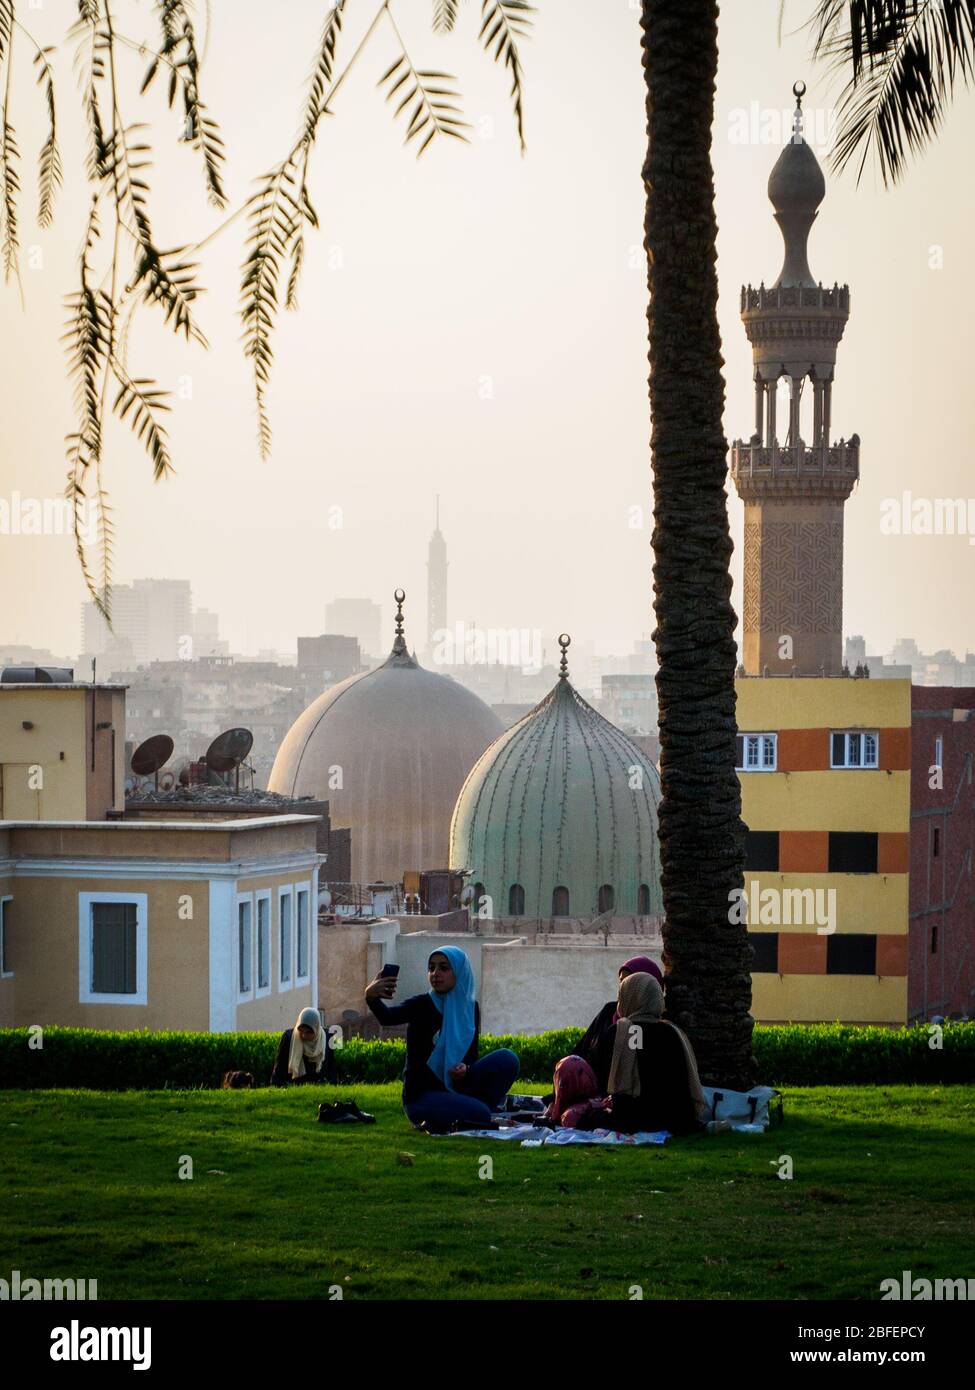 Al Azhar Park, Cairo, Egypt, October 2019, three girls sitting on a blanket in the park with the skyline of Cairo in the background Stock Photo